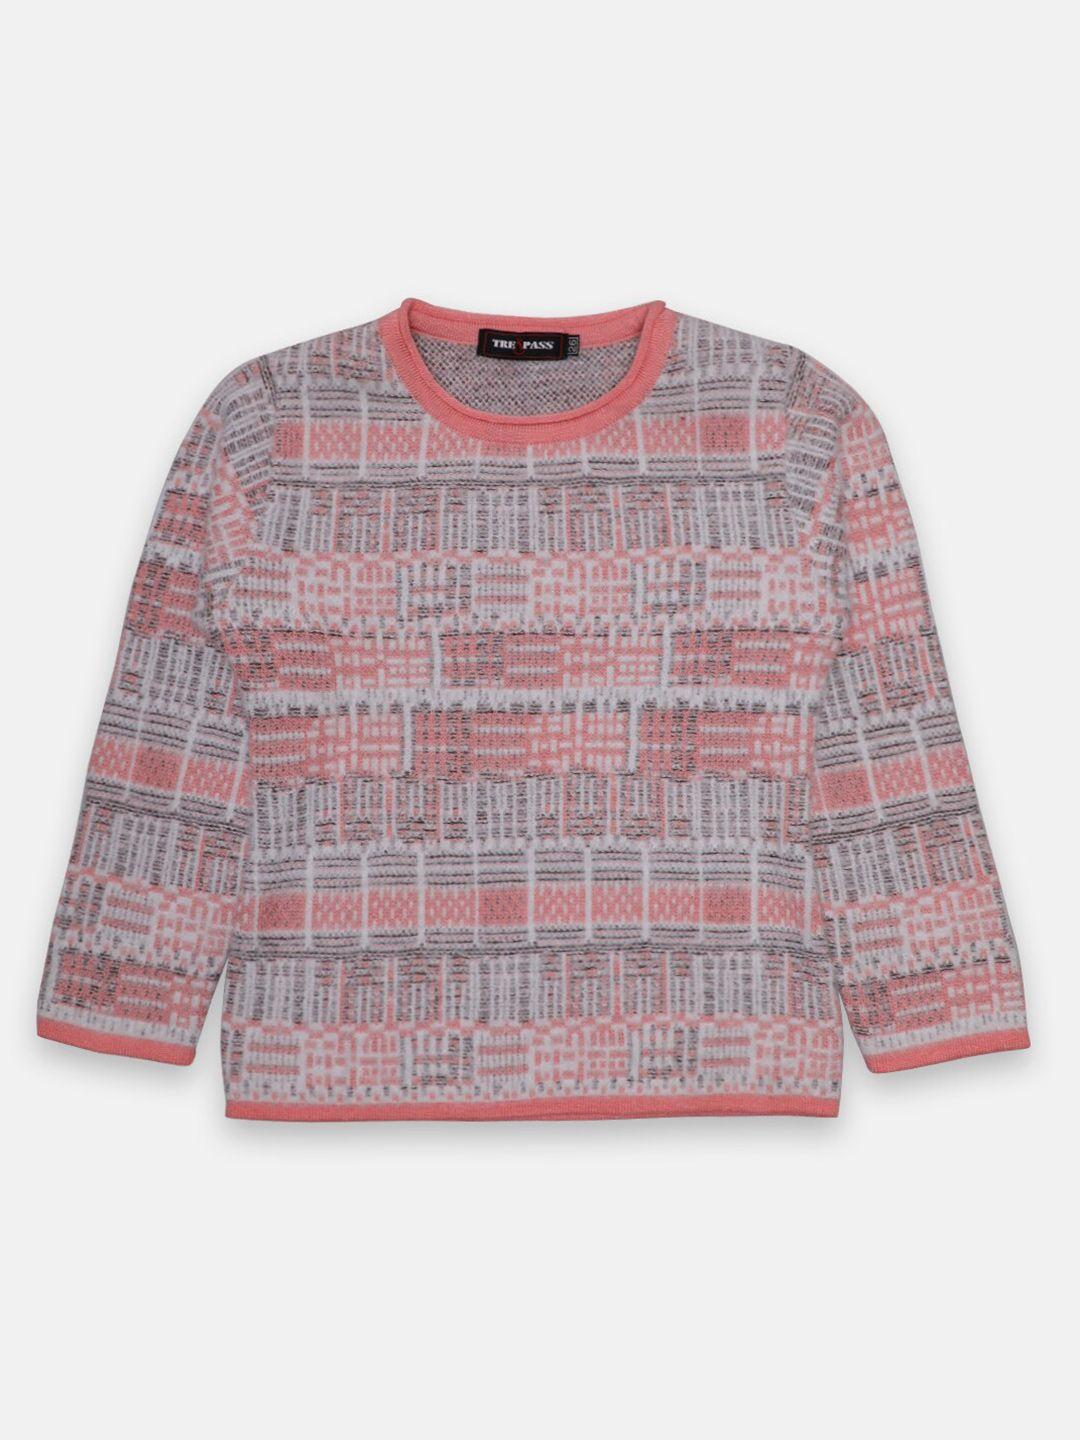 tre&pass boys peach-coloured & white printed woolen pullover